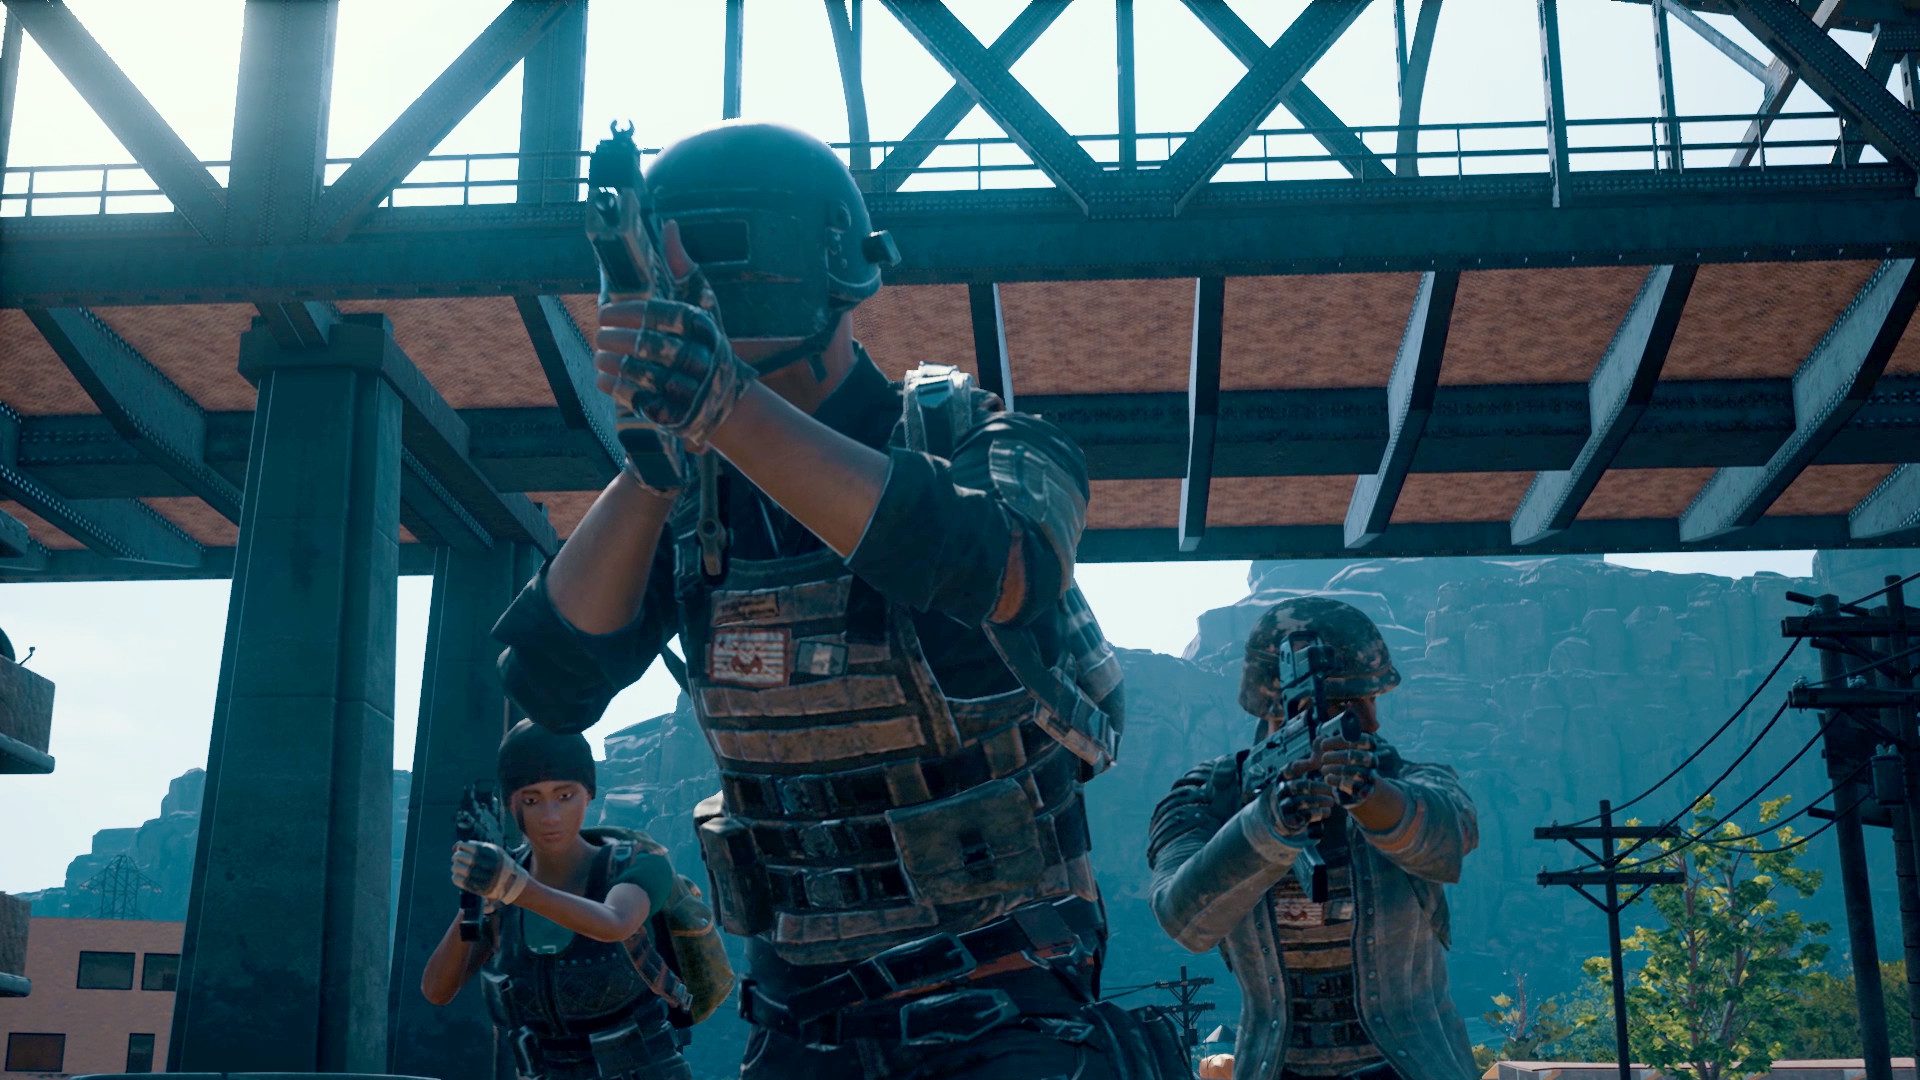 15 Arrested in PLAYERUNKNOWN’S BATTLEGROUNDS Cheating Program Bust